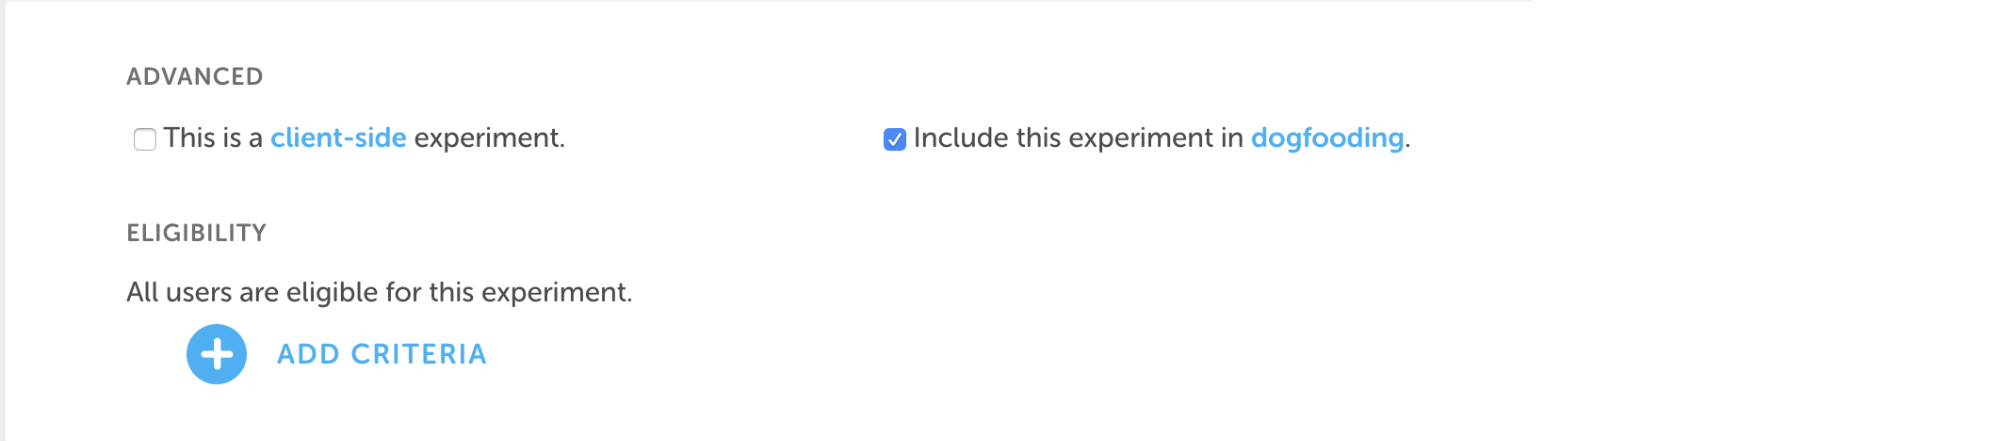 Experiment creation page (eligibility)